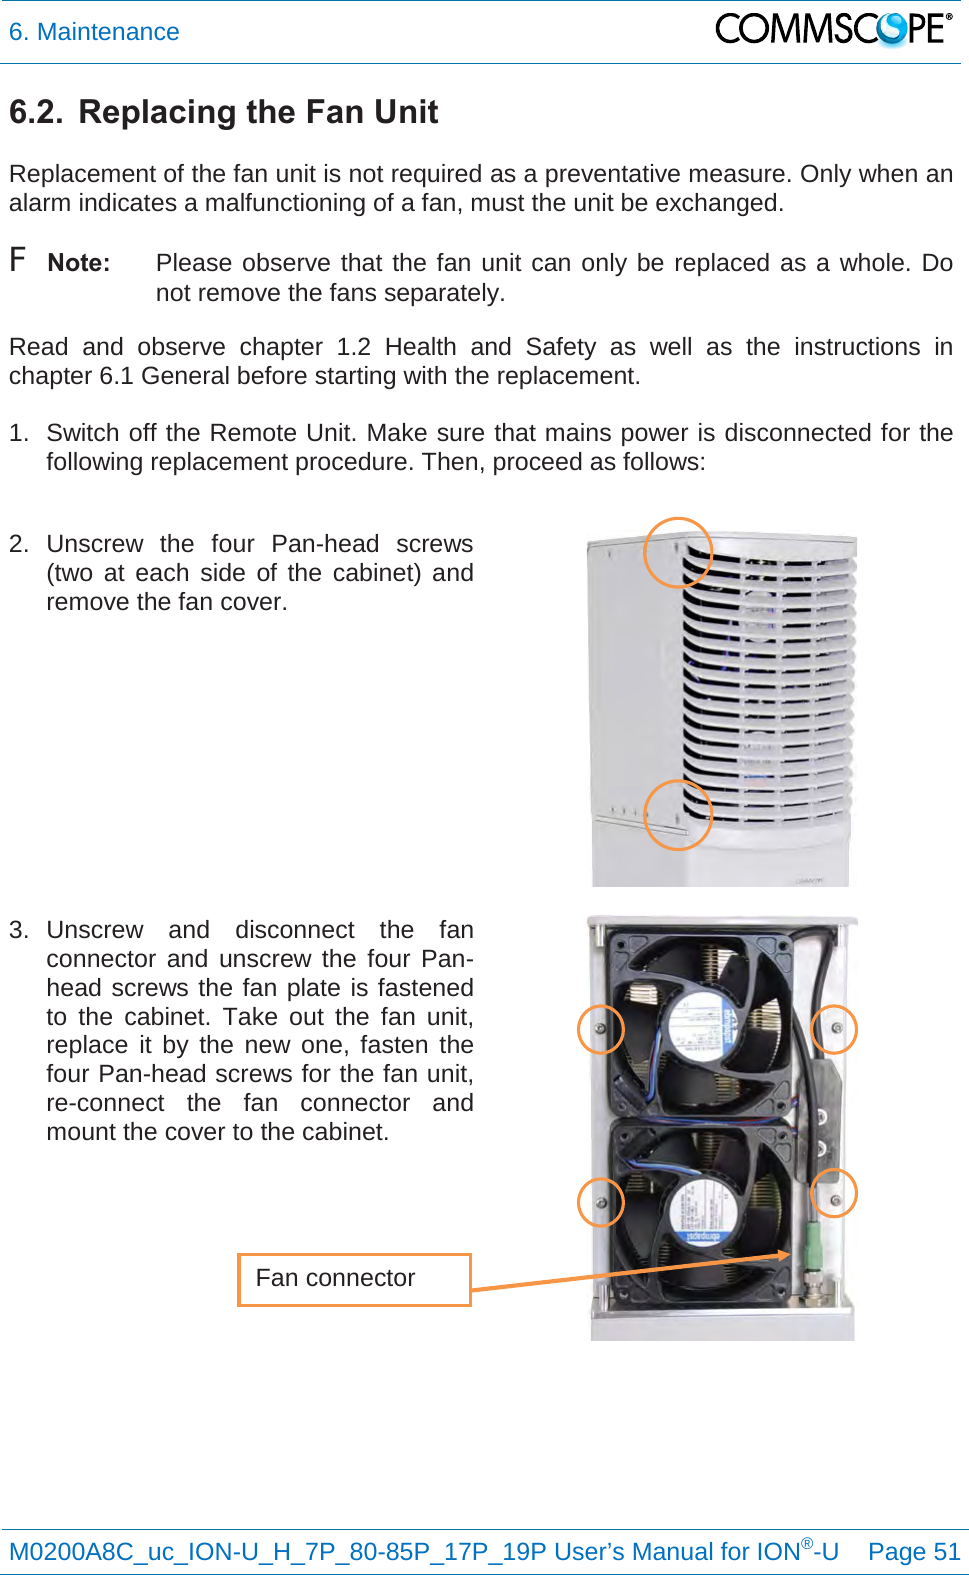 6. Maintenance   M0200A8C_uc_ION-U_H_7P_80-85P_17P_19P User’s Manual for ION®-U  Page 51  6.2.  Replacing the Fan Unit  Replacement of the fan unit is not required as a preventative measure. Only when an alarm indicates a malfunctioning of a fan, must the unit be exchanged. F Note: Please observe that the fan unit can only be replaced as a whole. Do not remove the fans separately. Read  and observe chapter  1.2 Health and Safety as well as the instructions in chapter 6.1 General before starting with the replacement.   1. Switch off the Remote Unit. Make sure that mains power is disconnected for the following replacement procedure. Then, proceed as follows:  2.  Unscrew  the four Pan-head  screws (two at each side of the cabinet) and remove the fan cover.     3. Unscrew and disconnect the fan connector and unscrew the four Pan-head screws the fan plate is fastened to the cabinet. Take out the fan unit, replace it by the new one, fasten the four Pan-head screws for the fan unit, re-connect the fan connector and mount the cover to the cabinet.       Fan connector 